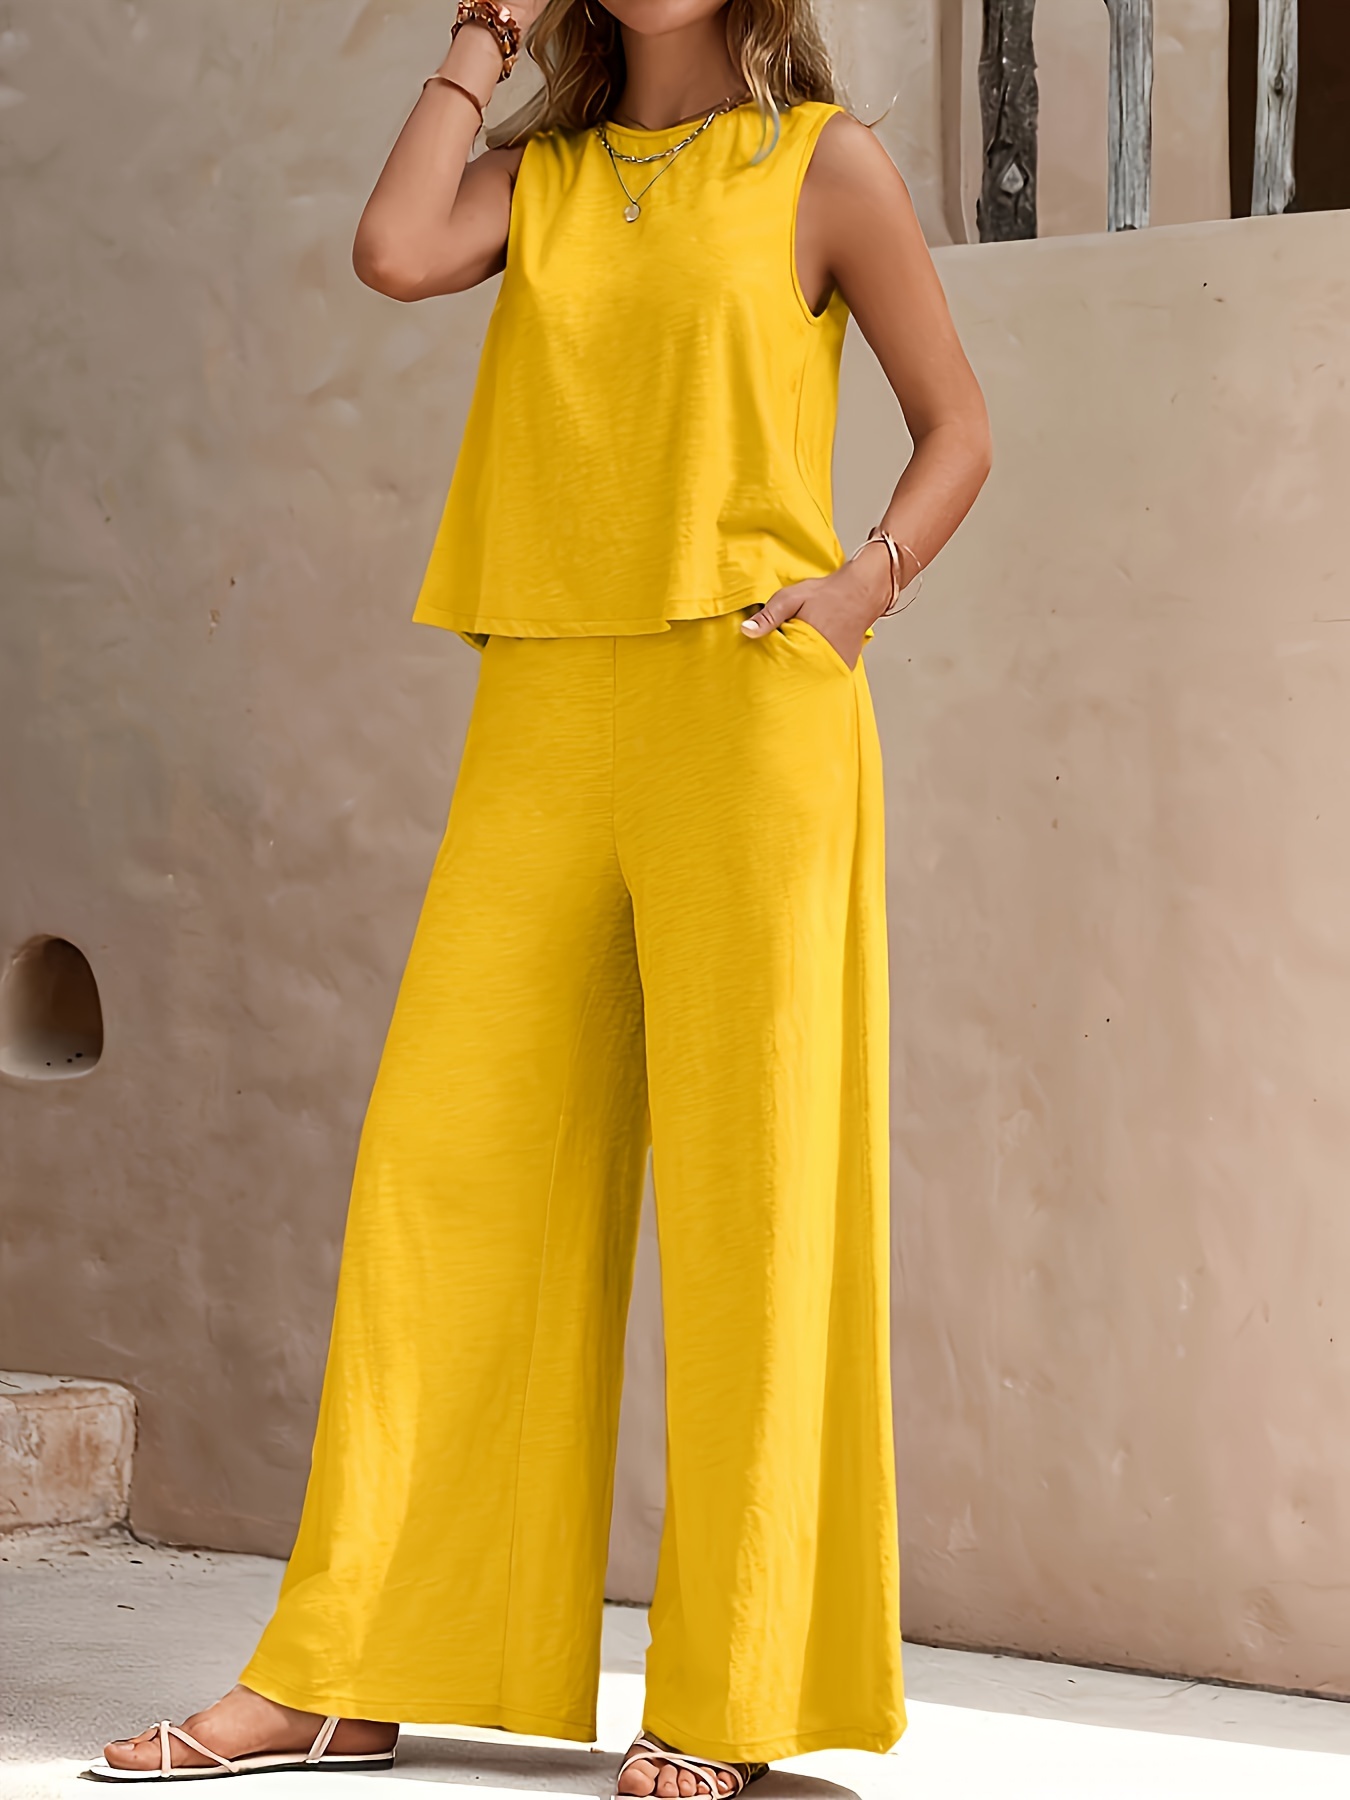 Solid Elegant Two-piece Set, Sleeveless Tank Top & Wide Leg Loose Pants Outfits, Women's Clothing